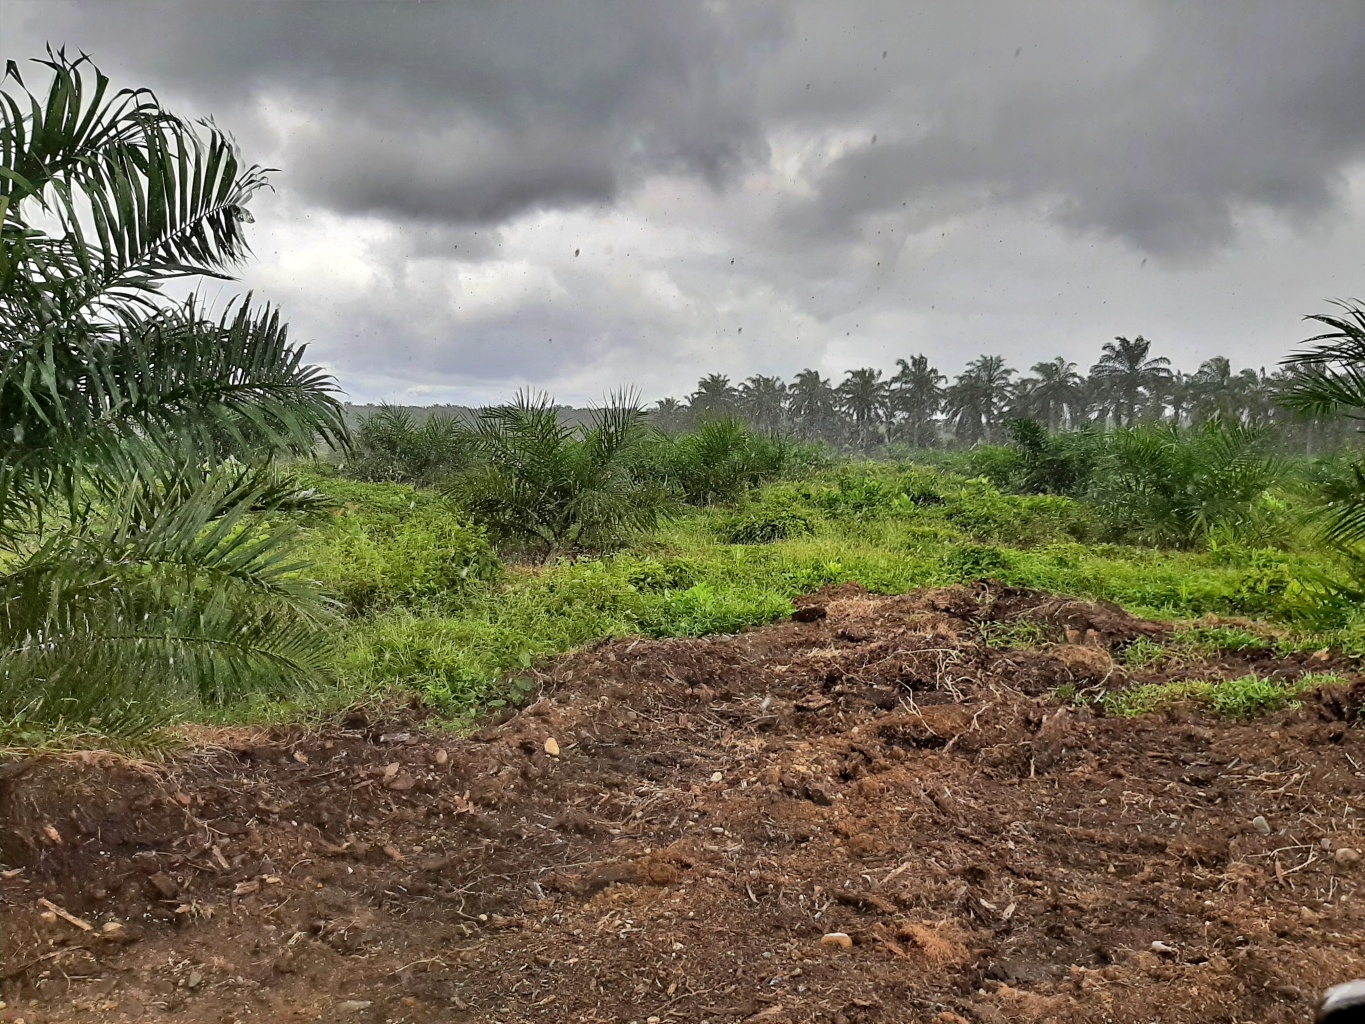 Climate effects and manure deposit for oil palm